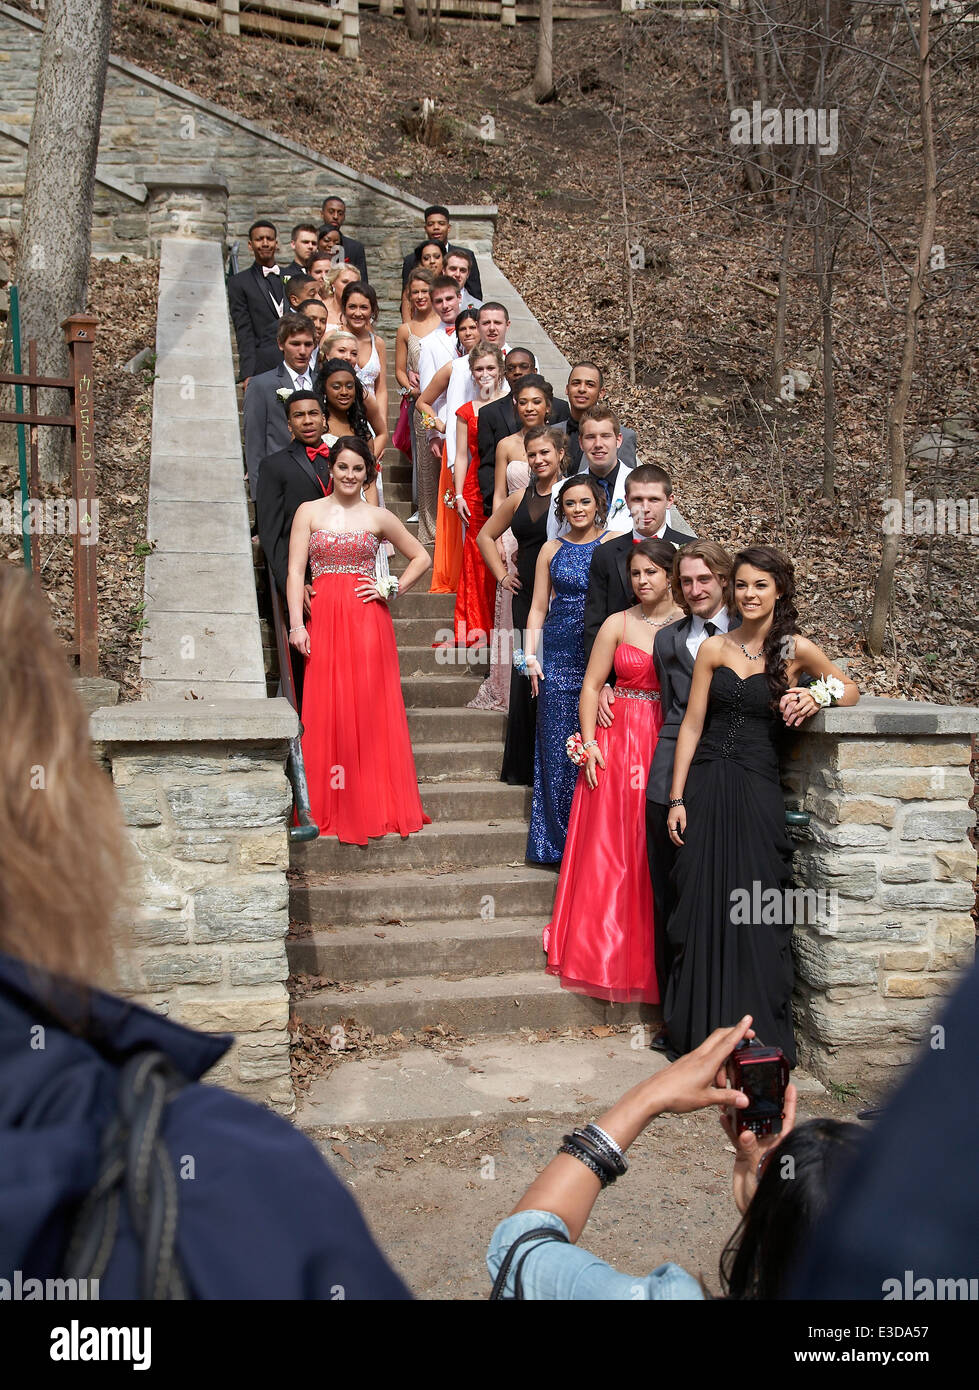 A group of high school students posing for their prom pictures at Minnehaha falls, Minneapolis, USA. Stock Photo